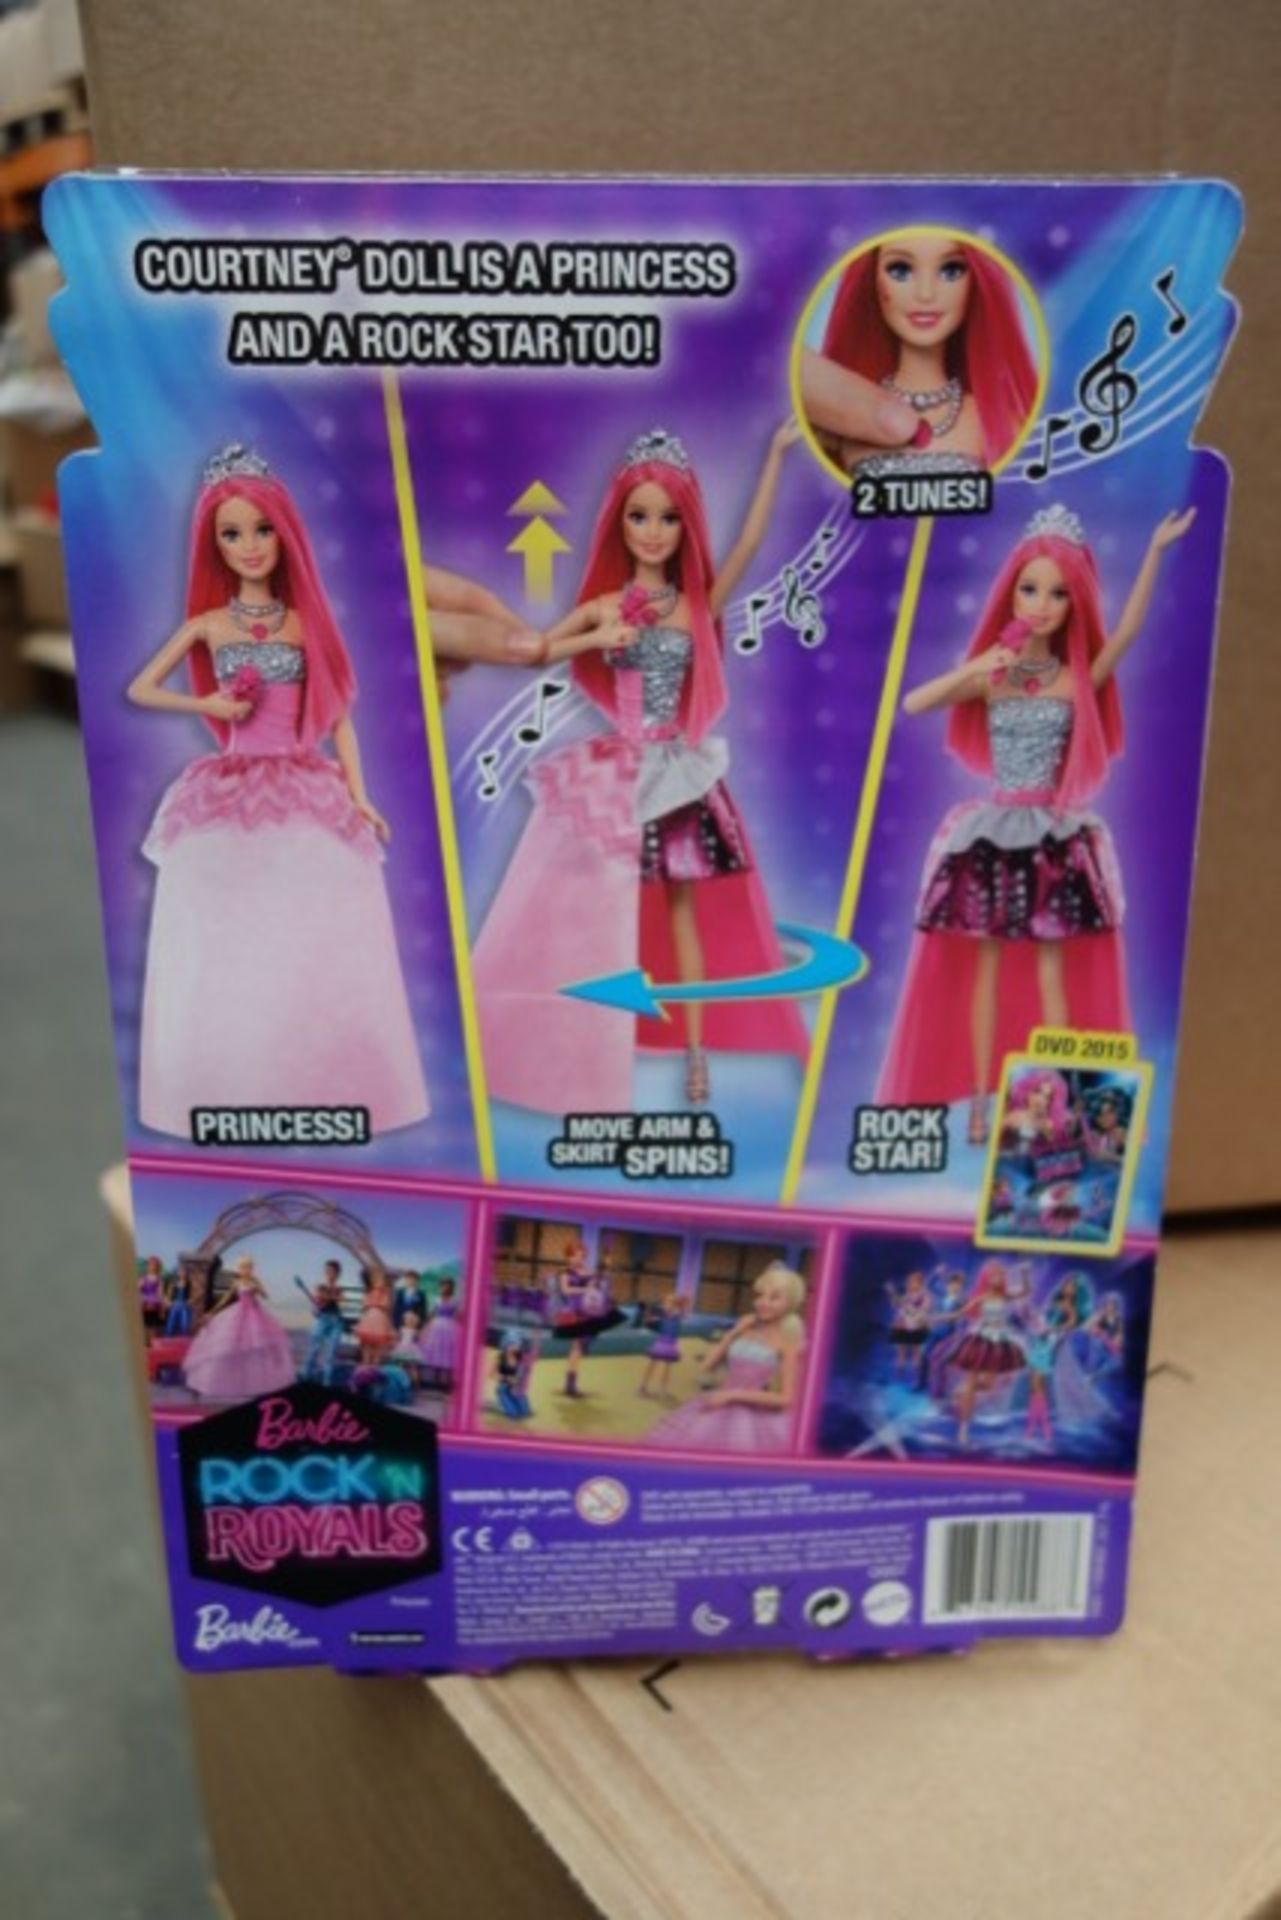 12 x Brand New - Barbie Rock 'n Royals 2 in 1 Doll - Courney. - Image 3 of 3